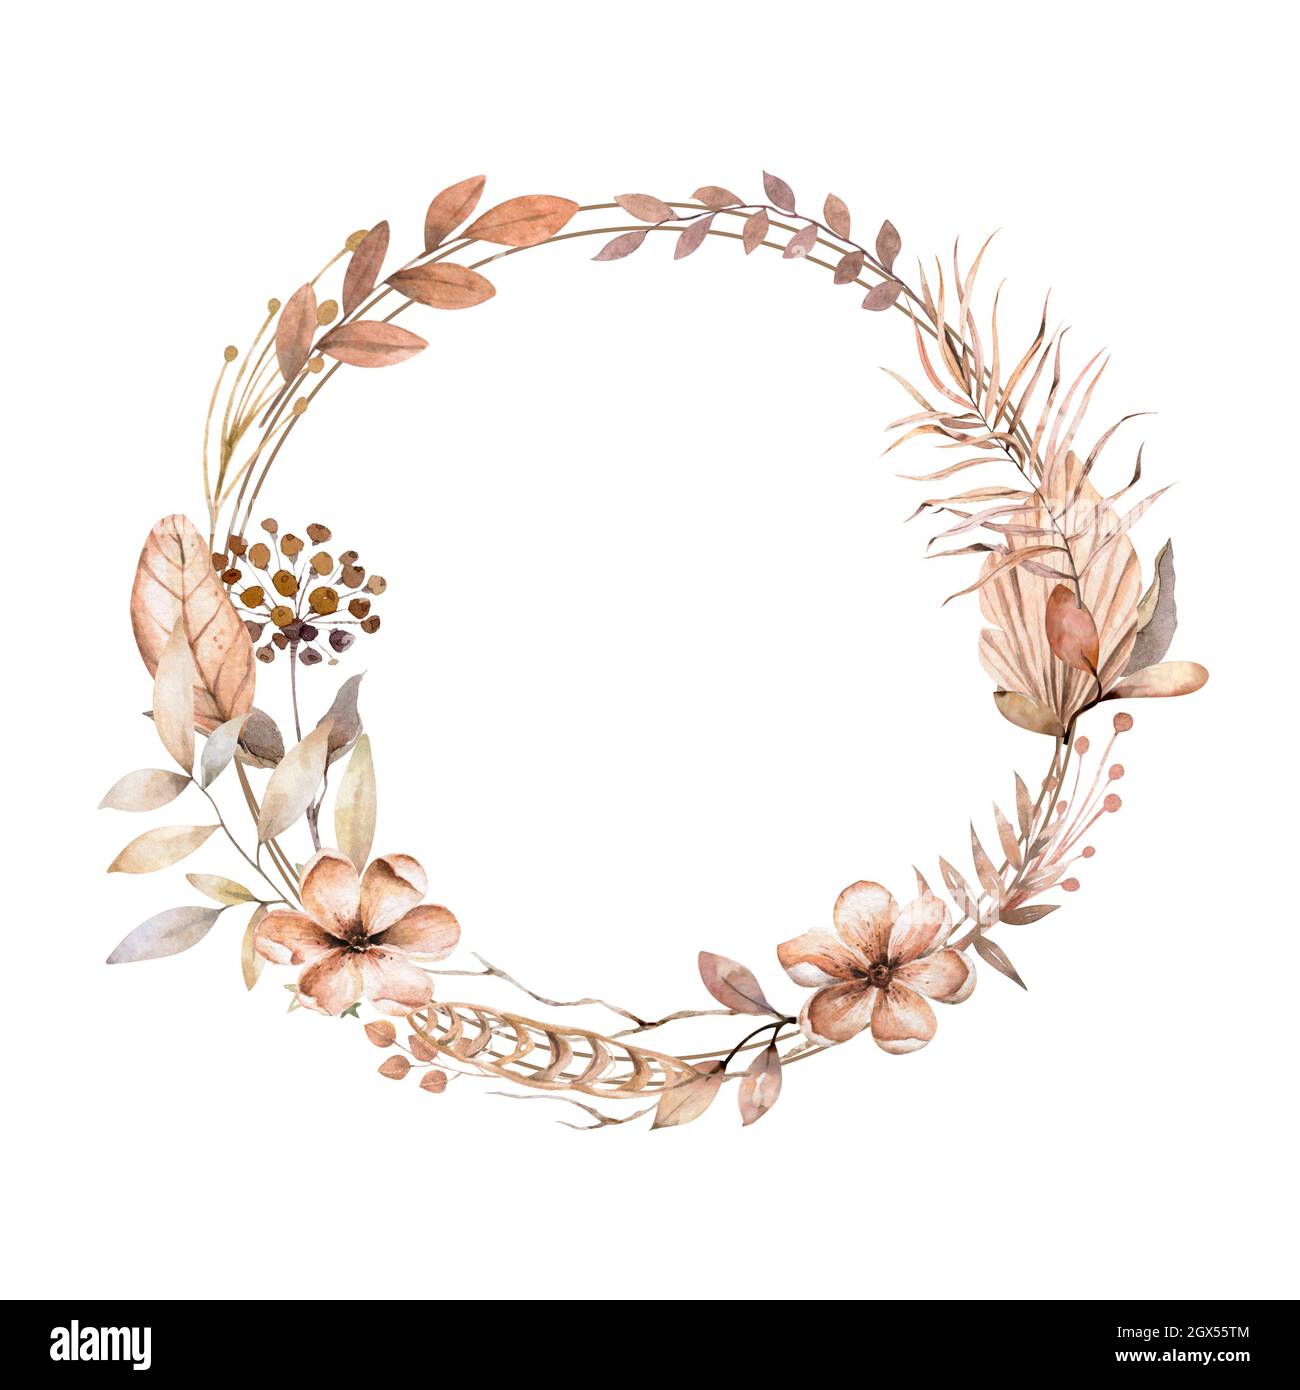 Aesthetic Dried Flowers and Leaf Frame Graphic by fathurmutiah